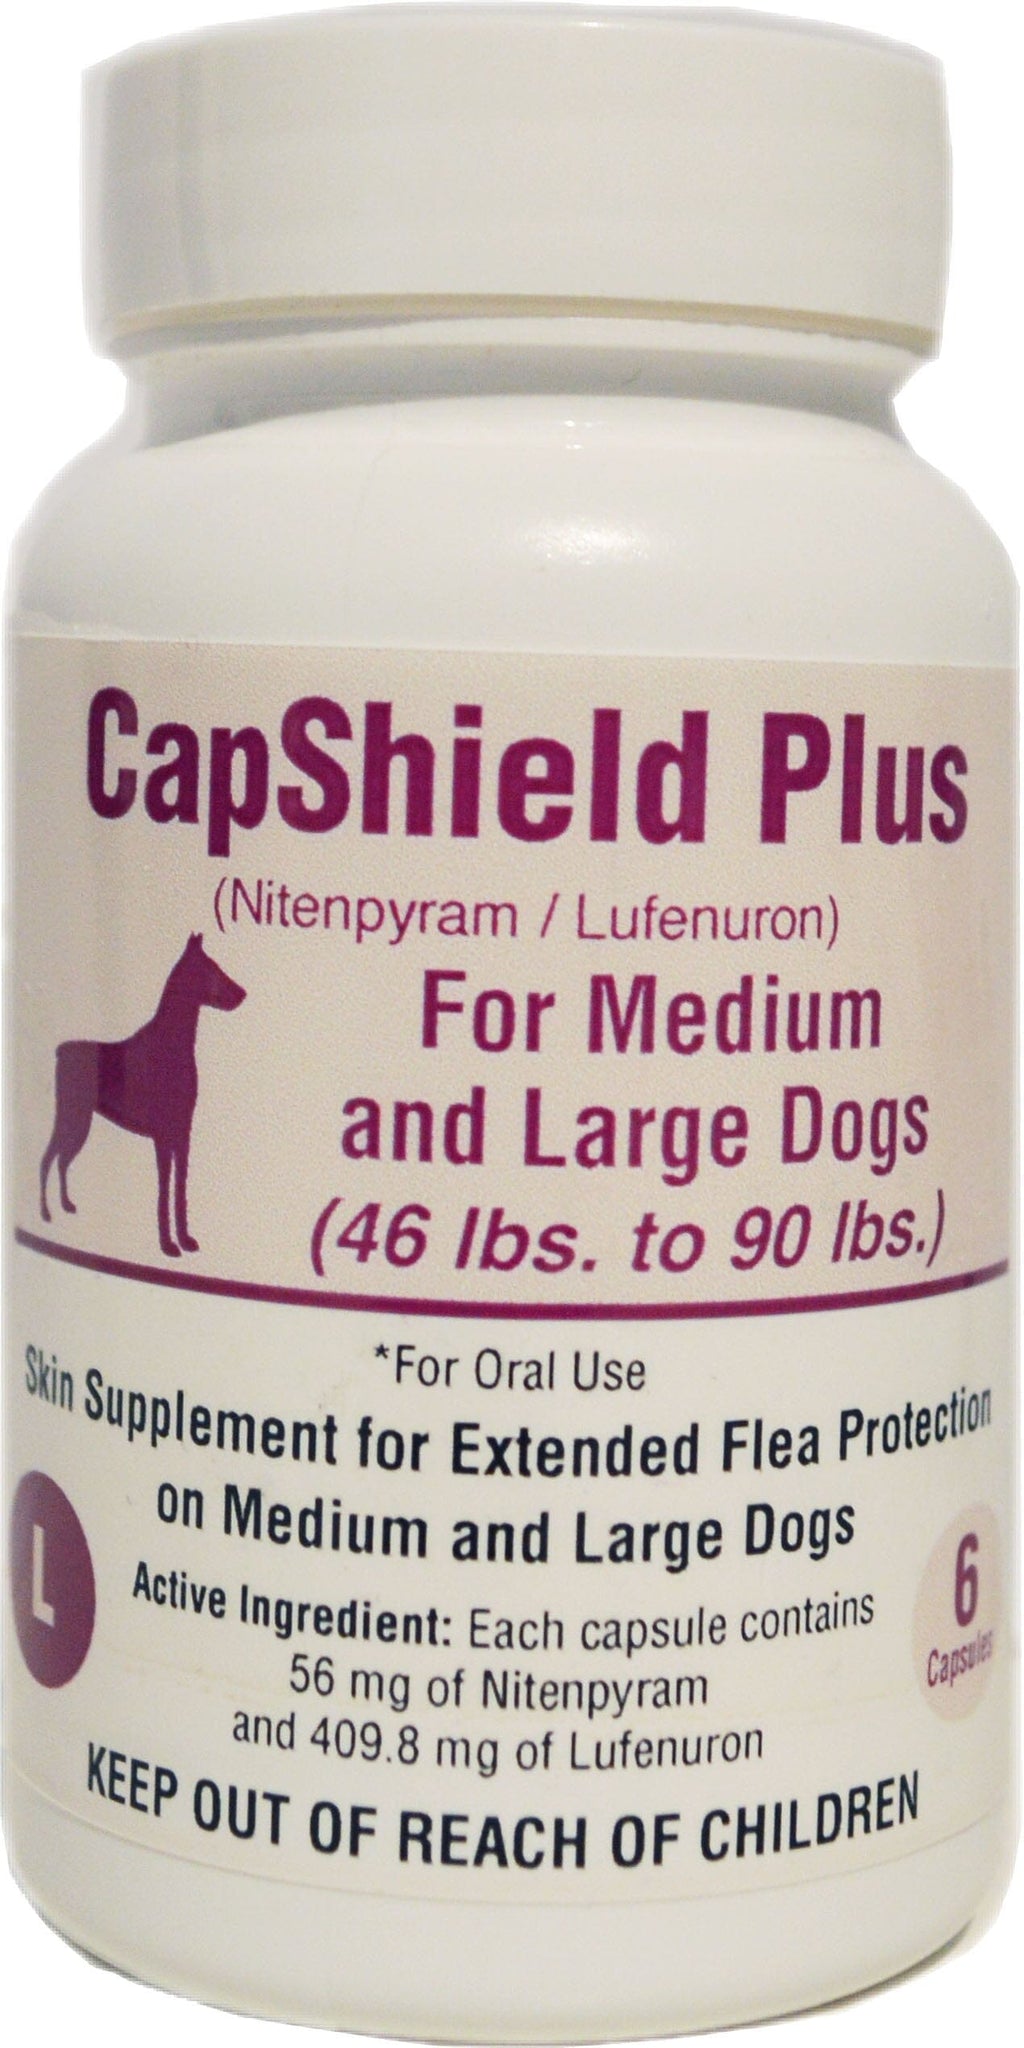 Capshield Plus Flea and Tick Protection Tablets for Dogs - 46 - 90 Lbs - 6 Count  